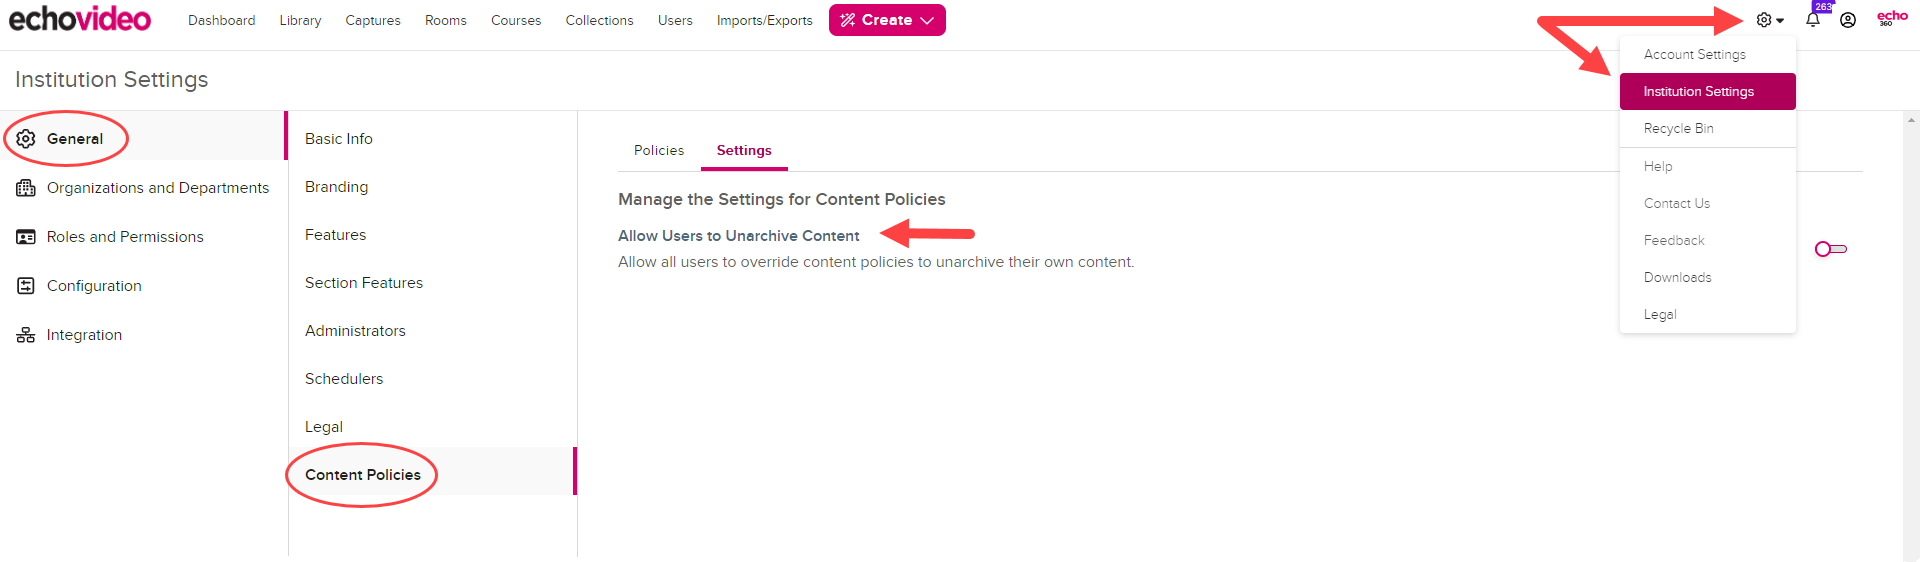 Institution Settings open to Content Policies then Settings with Allow Users to Unarchive Content toggle disabled as shown by the steps described